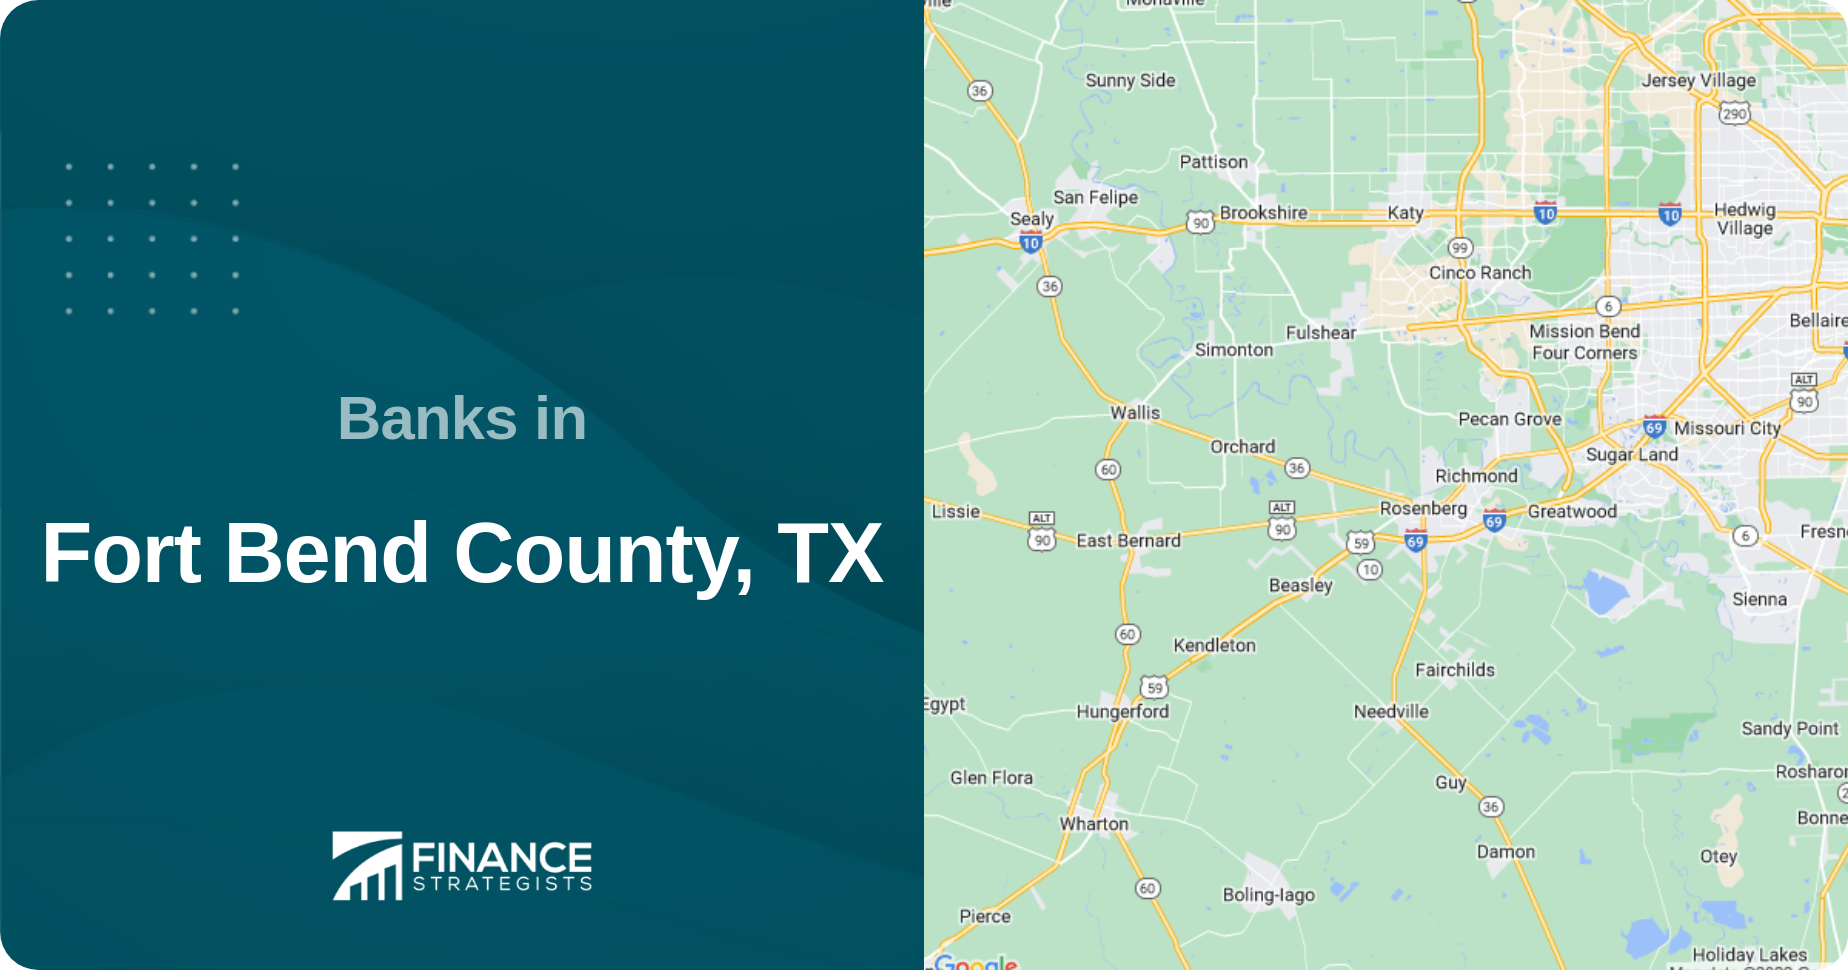 Banks in Fort Bend County, TX